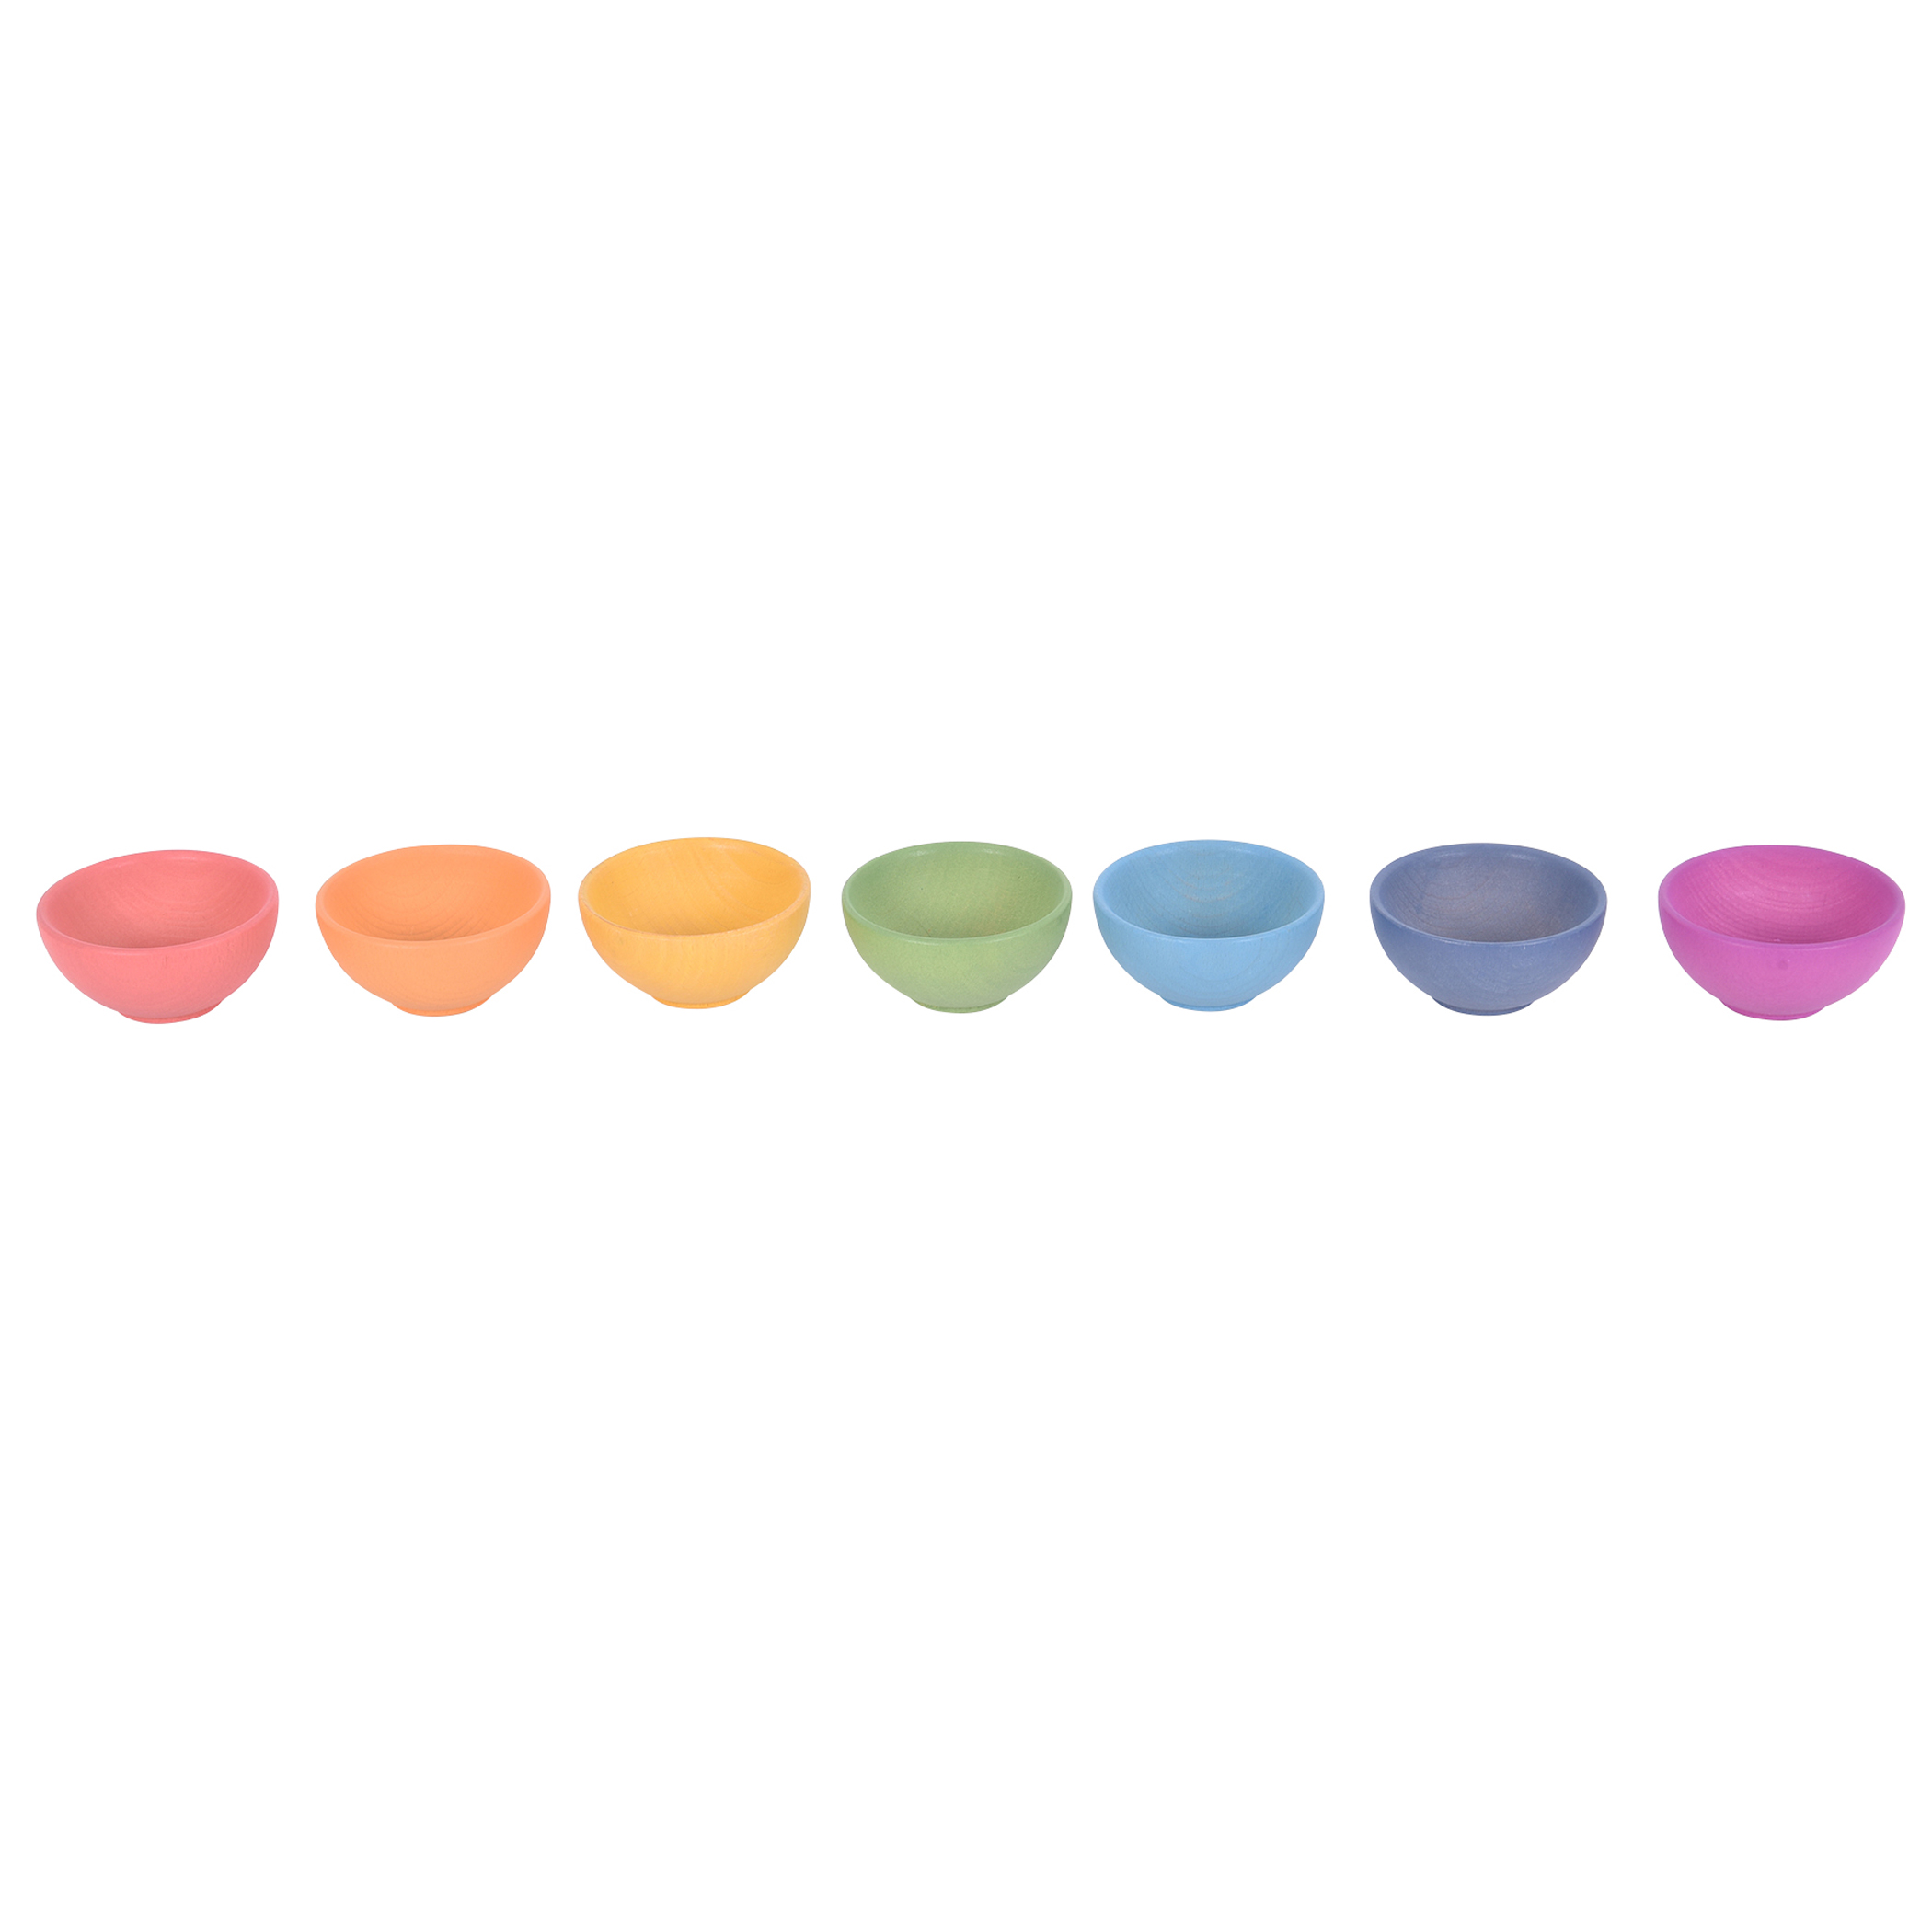 TickiT Rainbow Wooden Bowls - Set of 7 Colors - For Ages 10m+ - Loose Parts Wooden Toy for Babies and Toddlers image number null